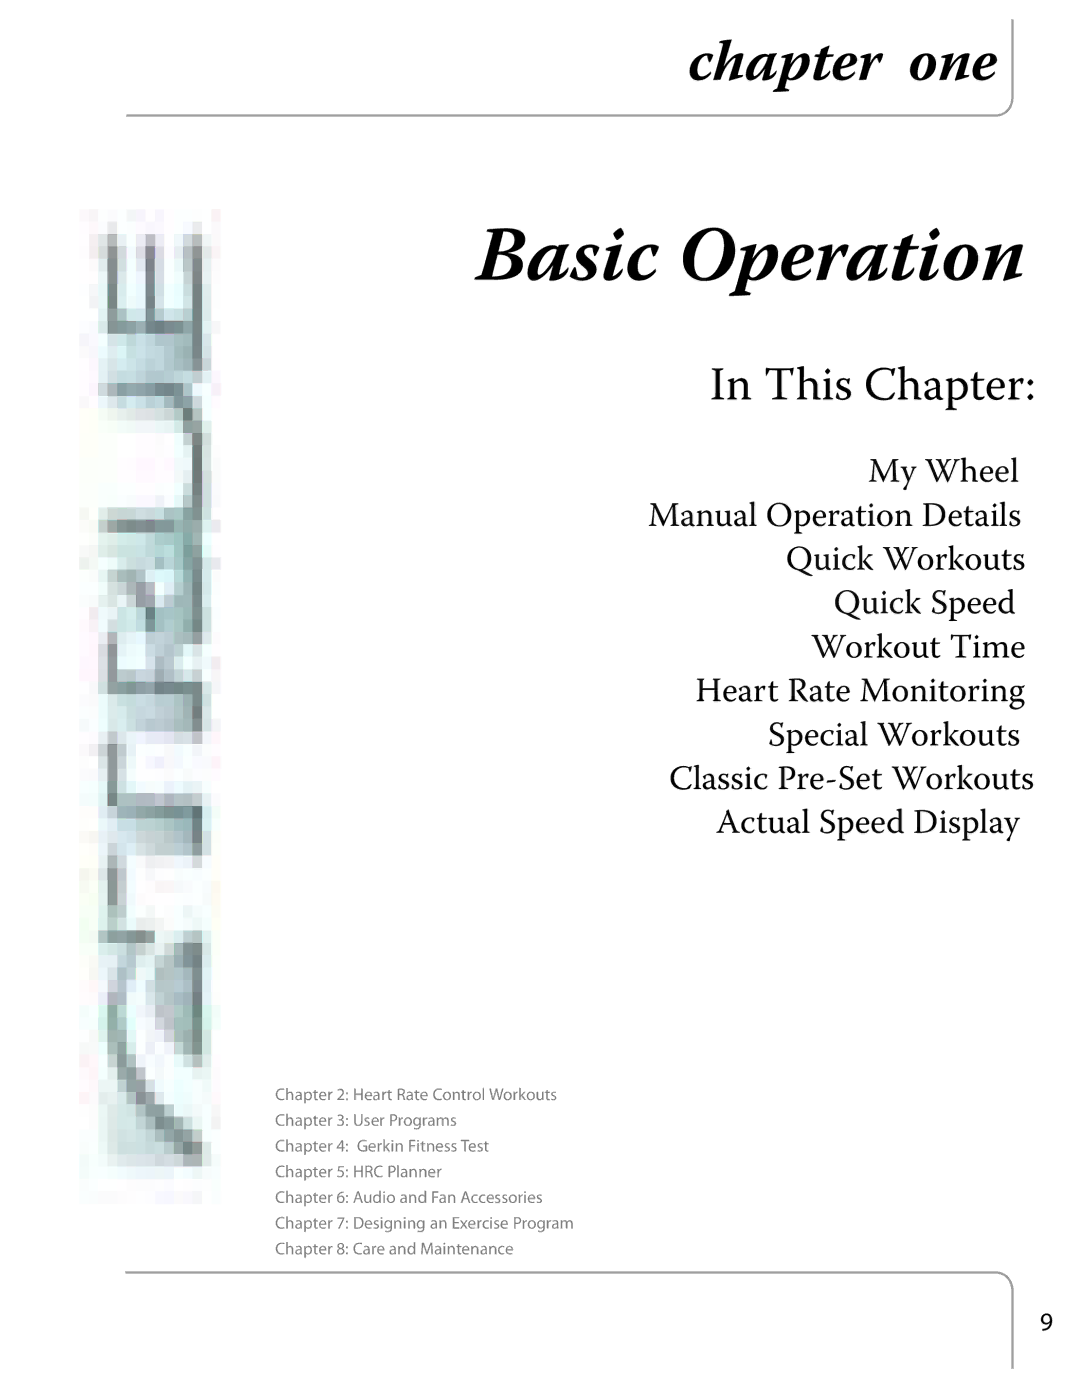 True Fitness Excel Series manual Basic Operation, This Chapter 